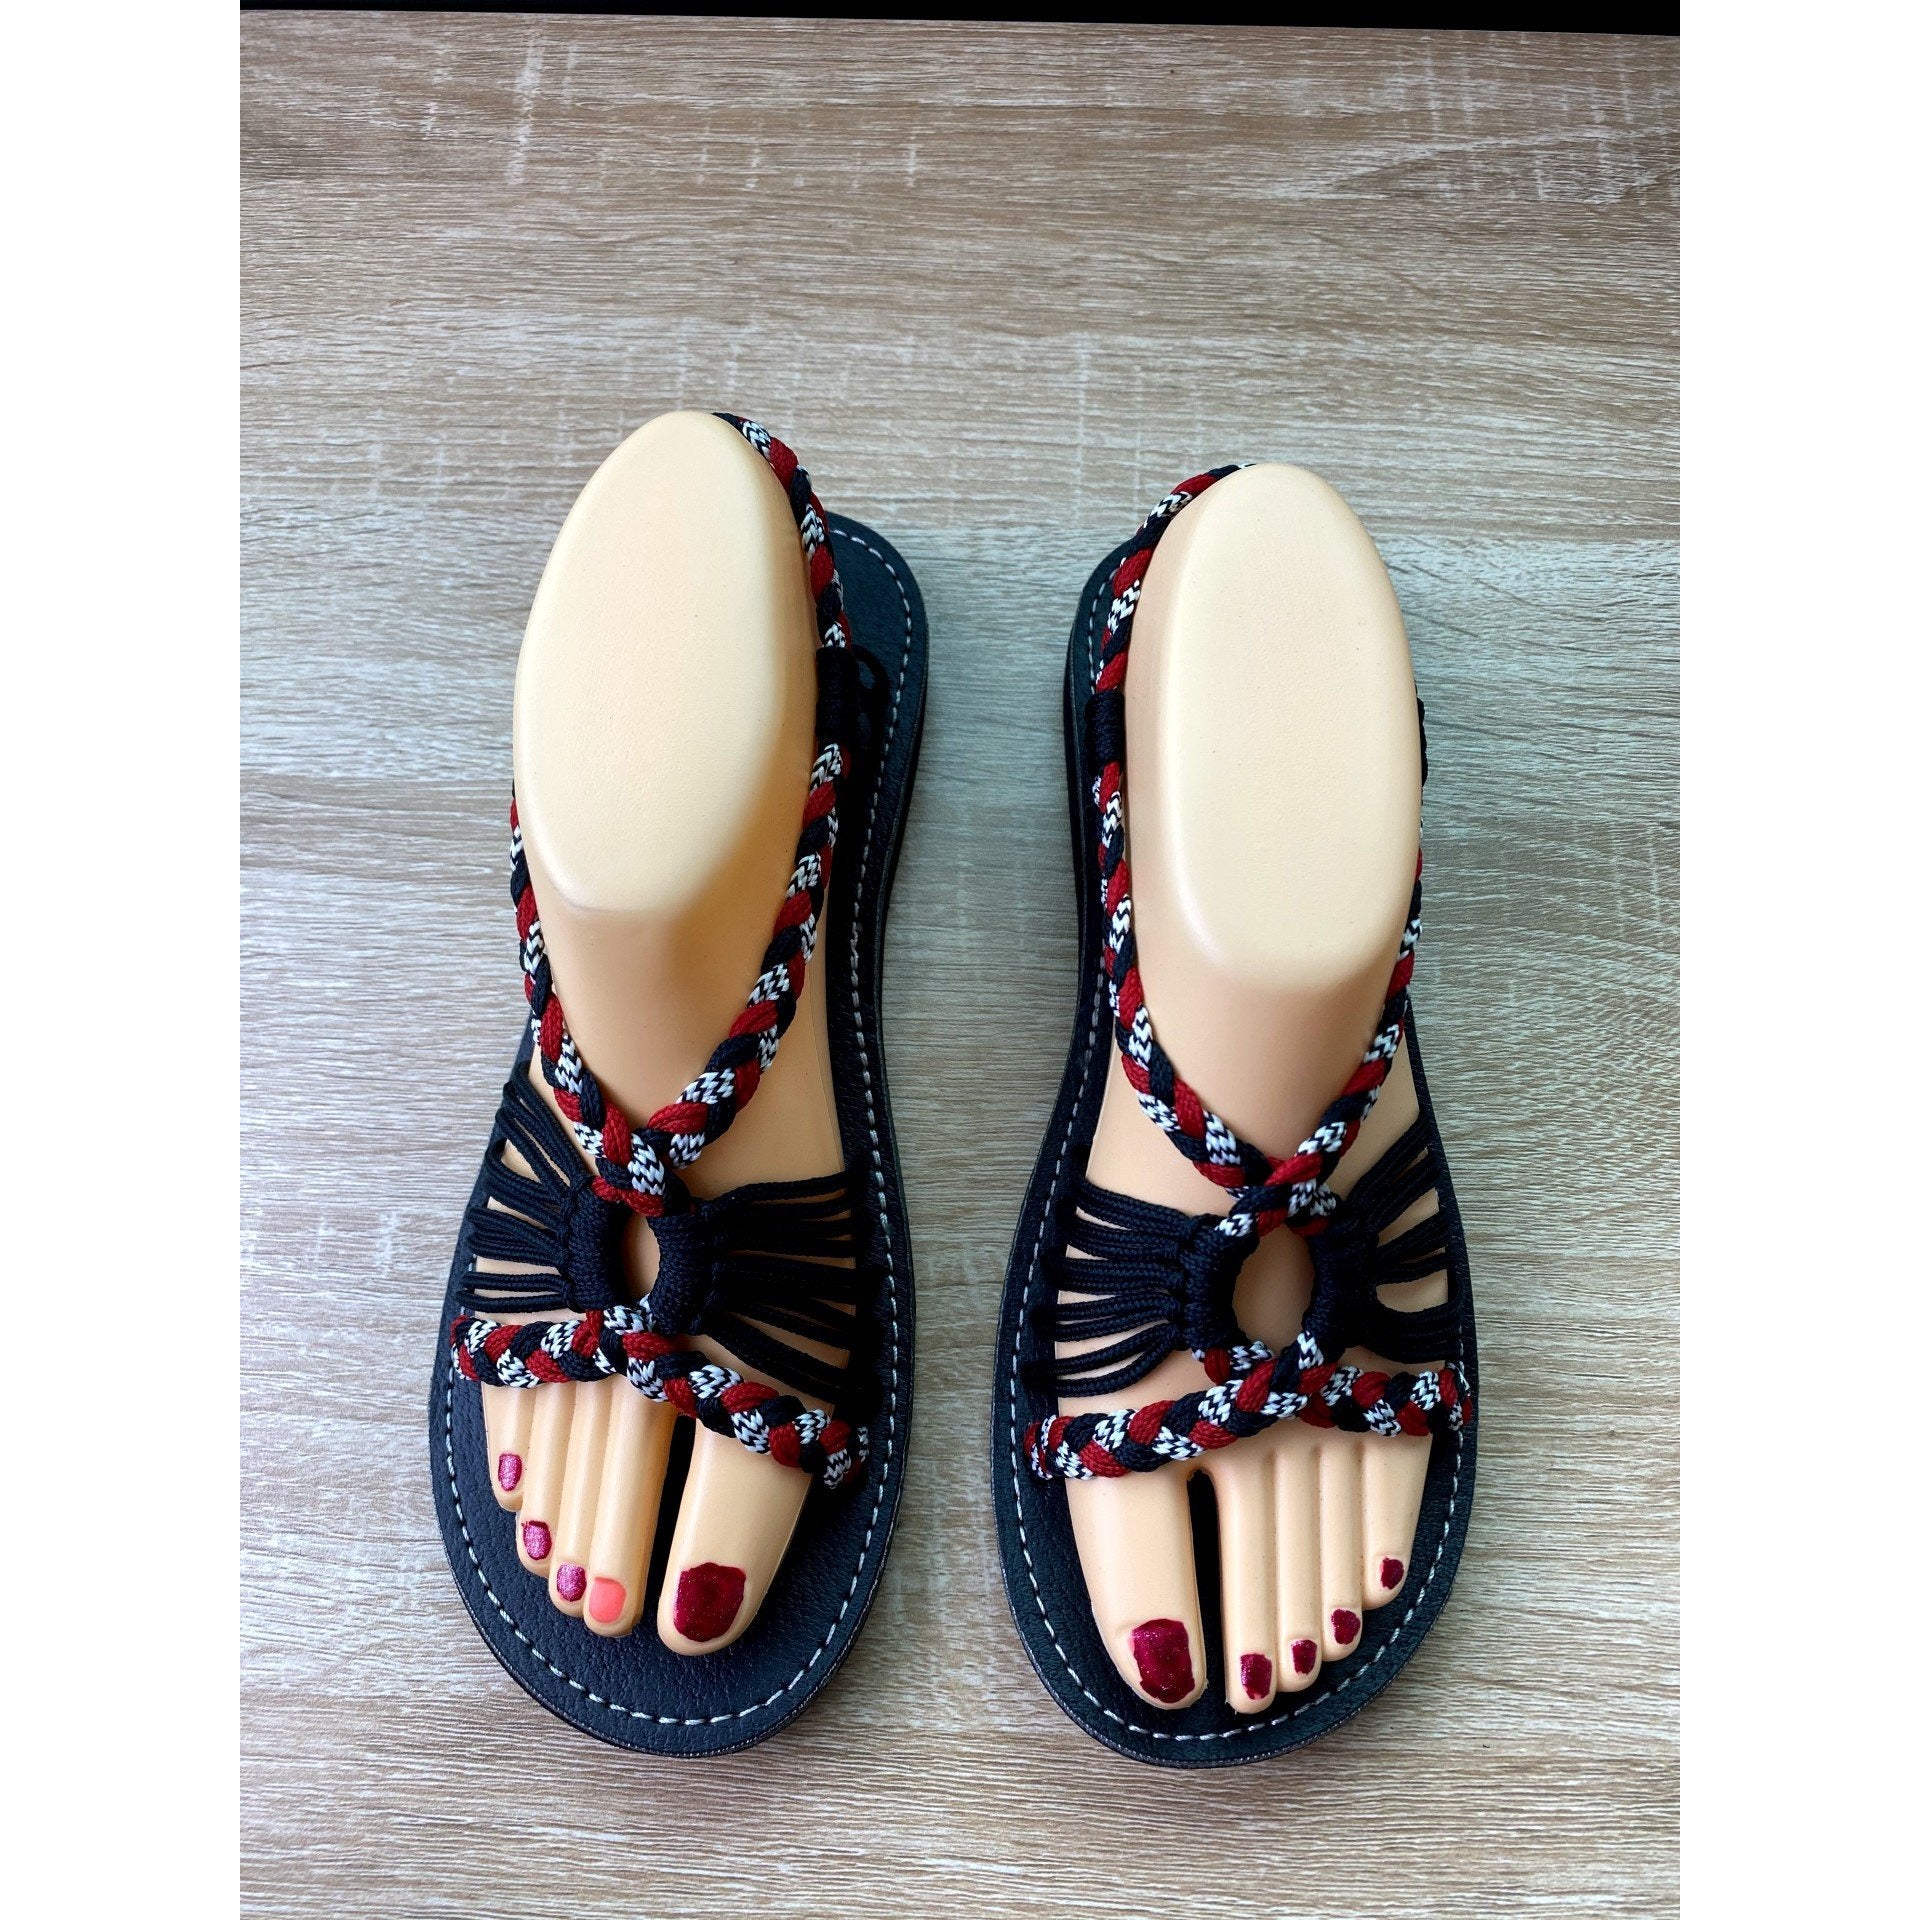 Shoes - Braided Sandals RBLW